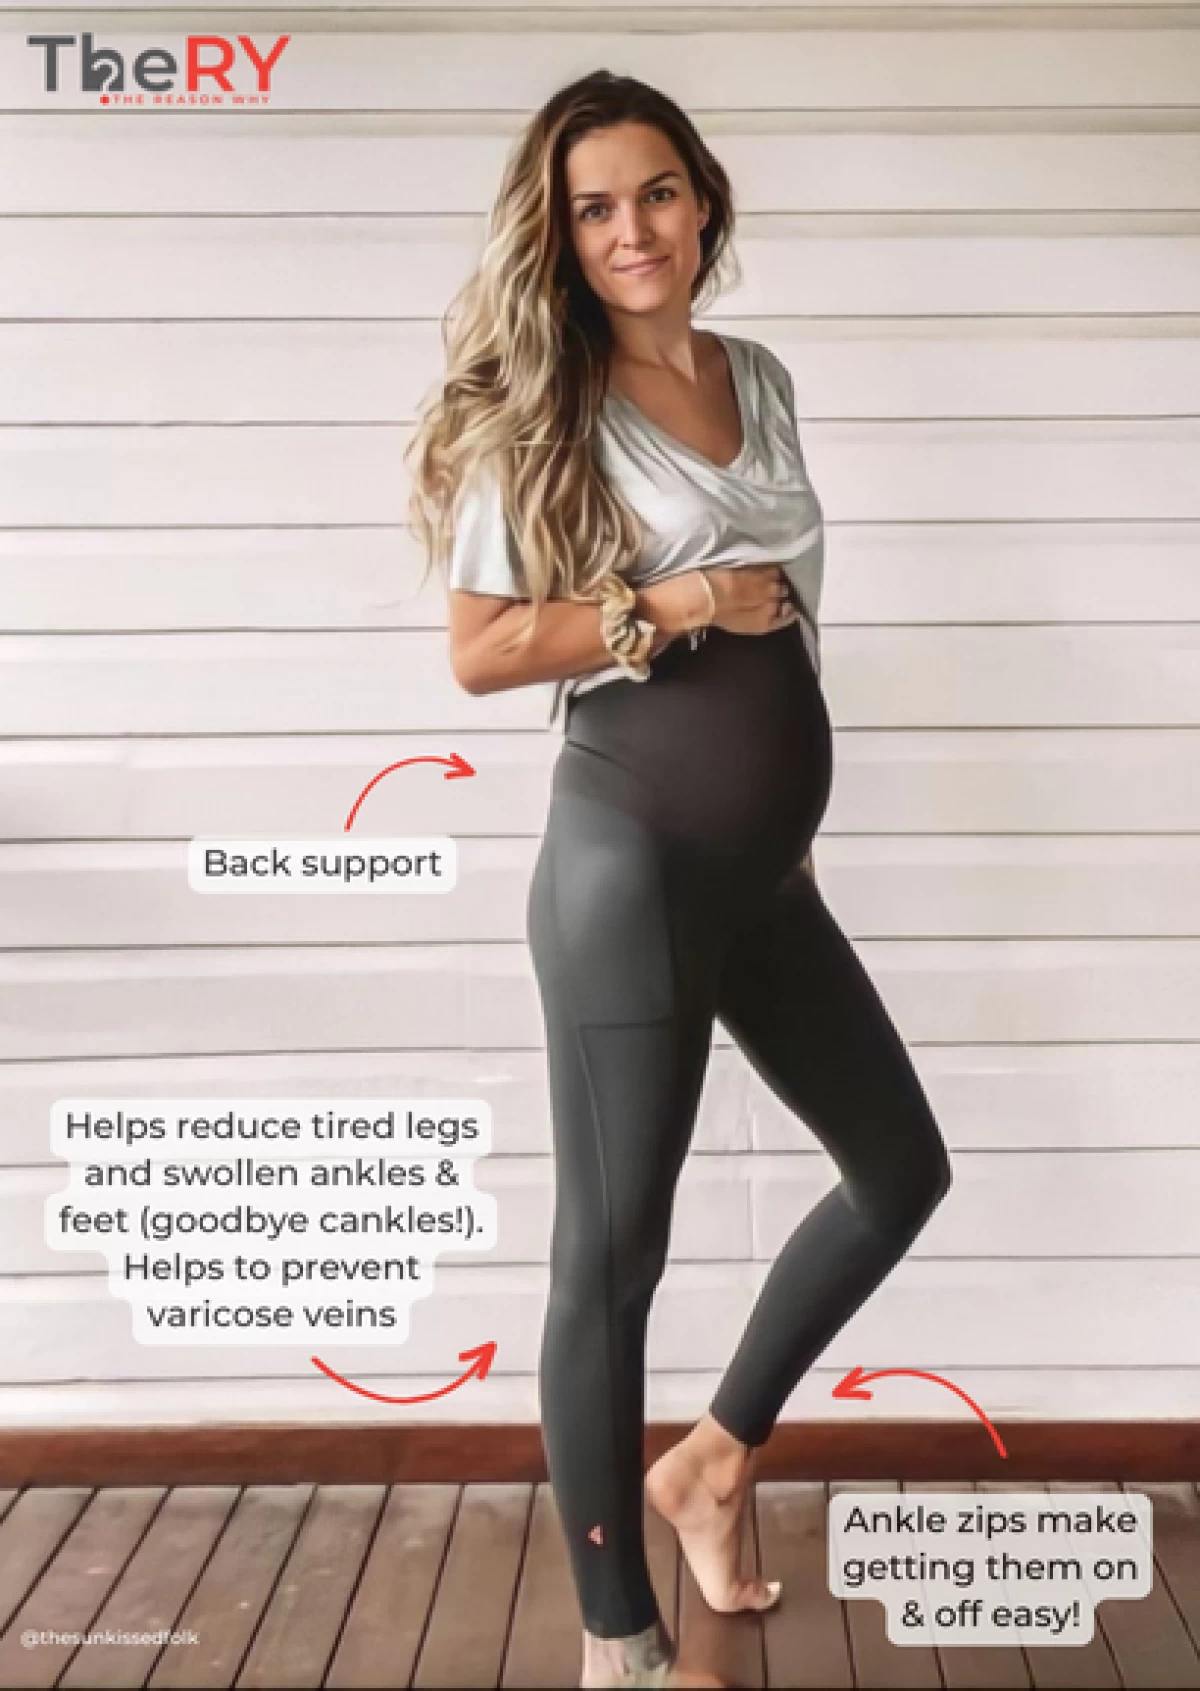 theRY group compression tights